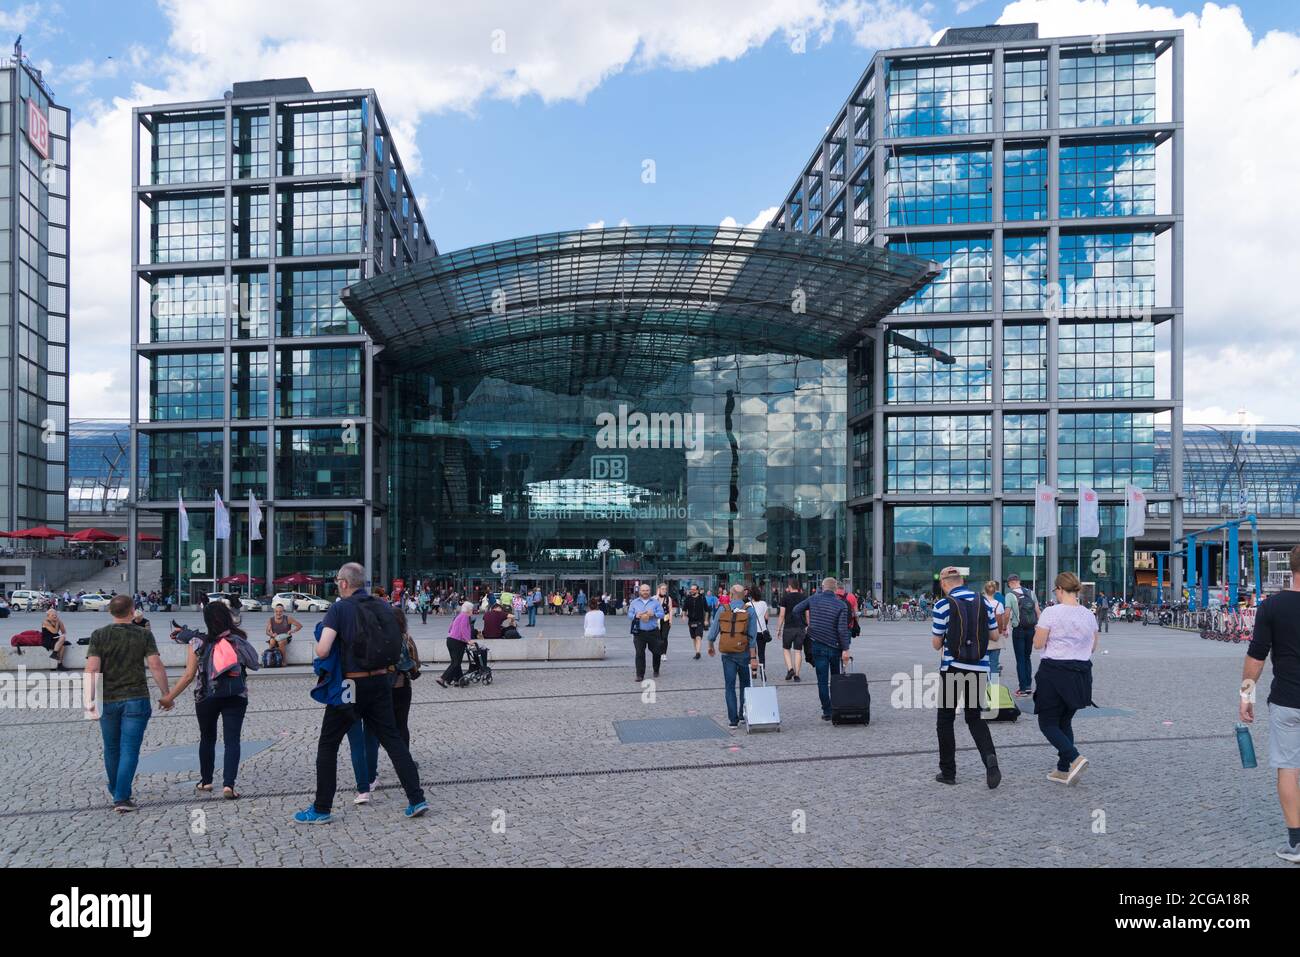 BERLIN, GERMANY - AUGUST 29, 2020: It is the main railway station of the city It came into full operation two days after a ceremonial opening on 26 Ma Stock Photo